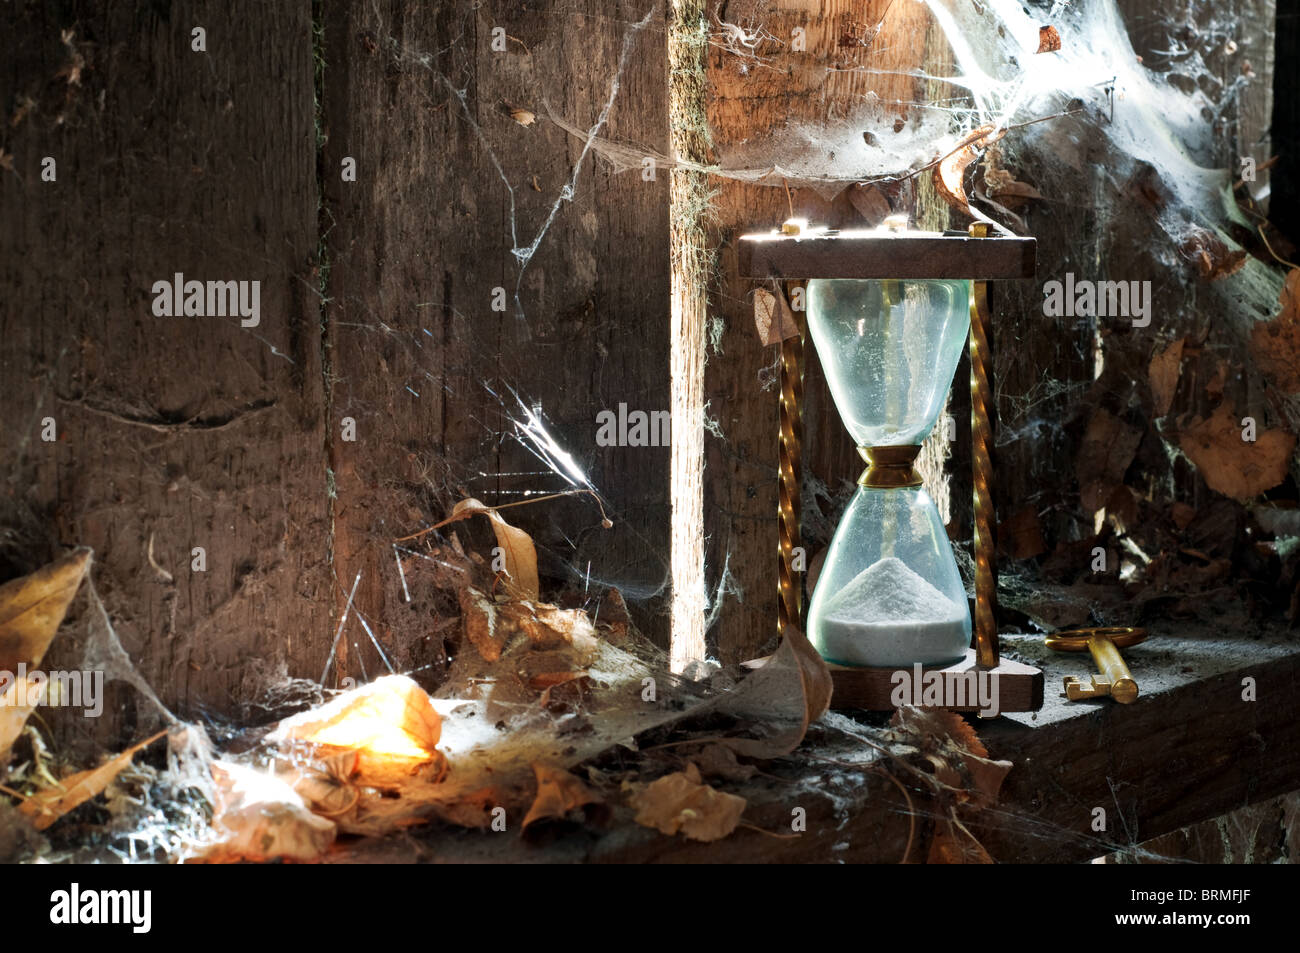 Past time concept - sandclock and a key forgotten in a dirty corner with leaves and cobwebs. Stock Photo